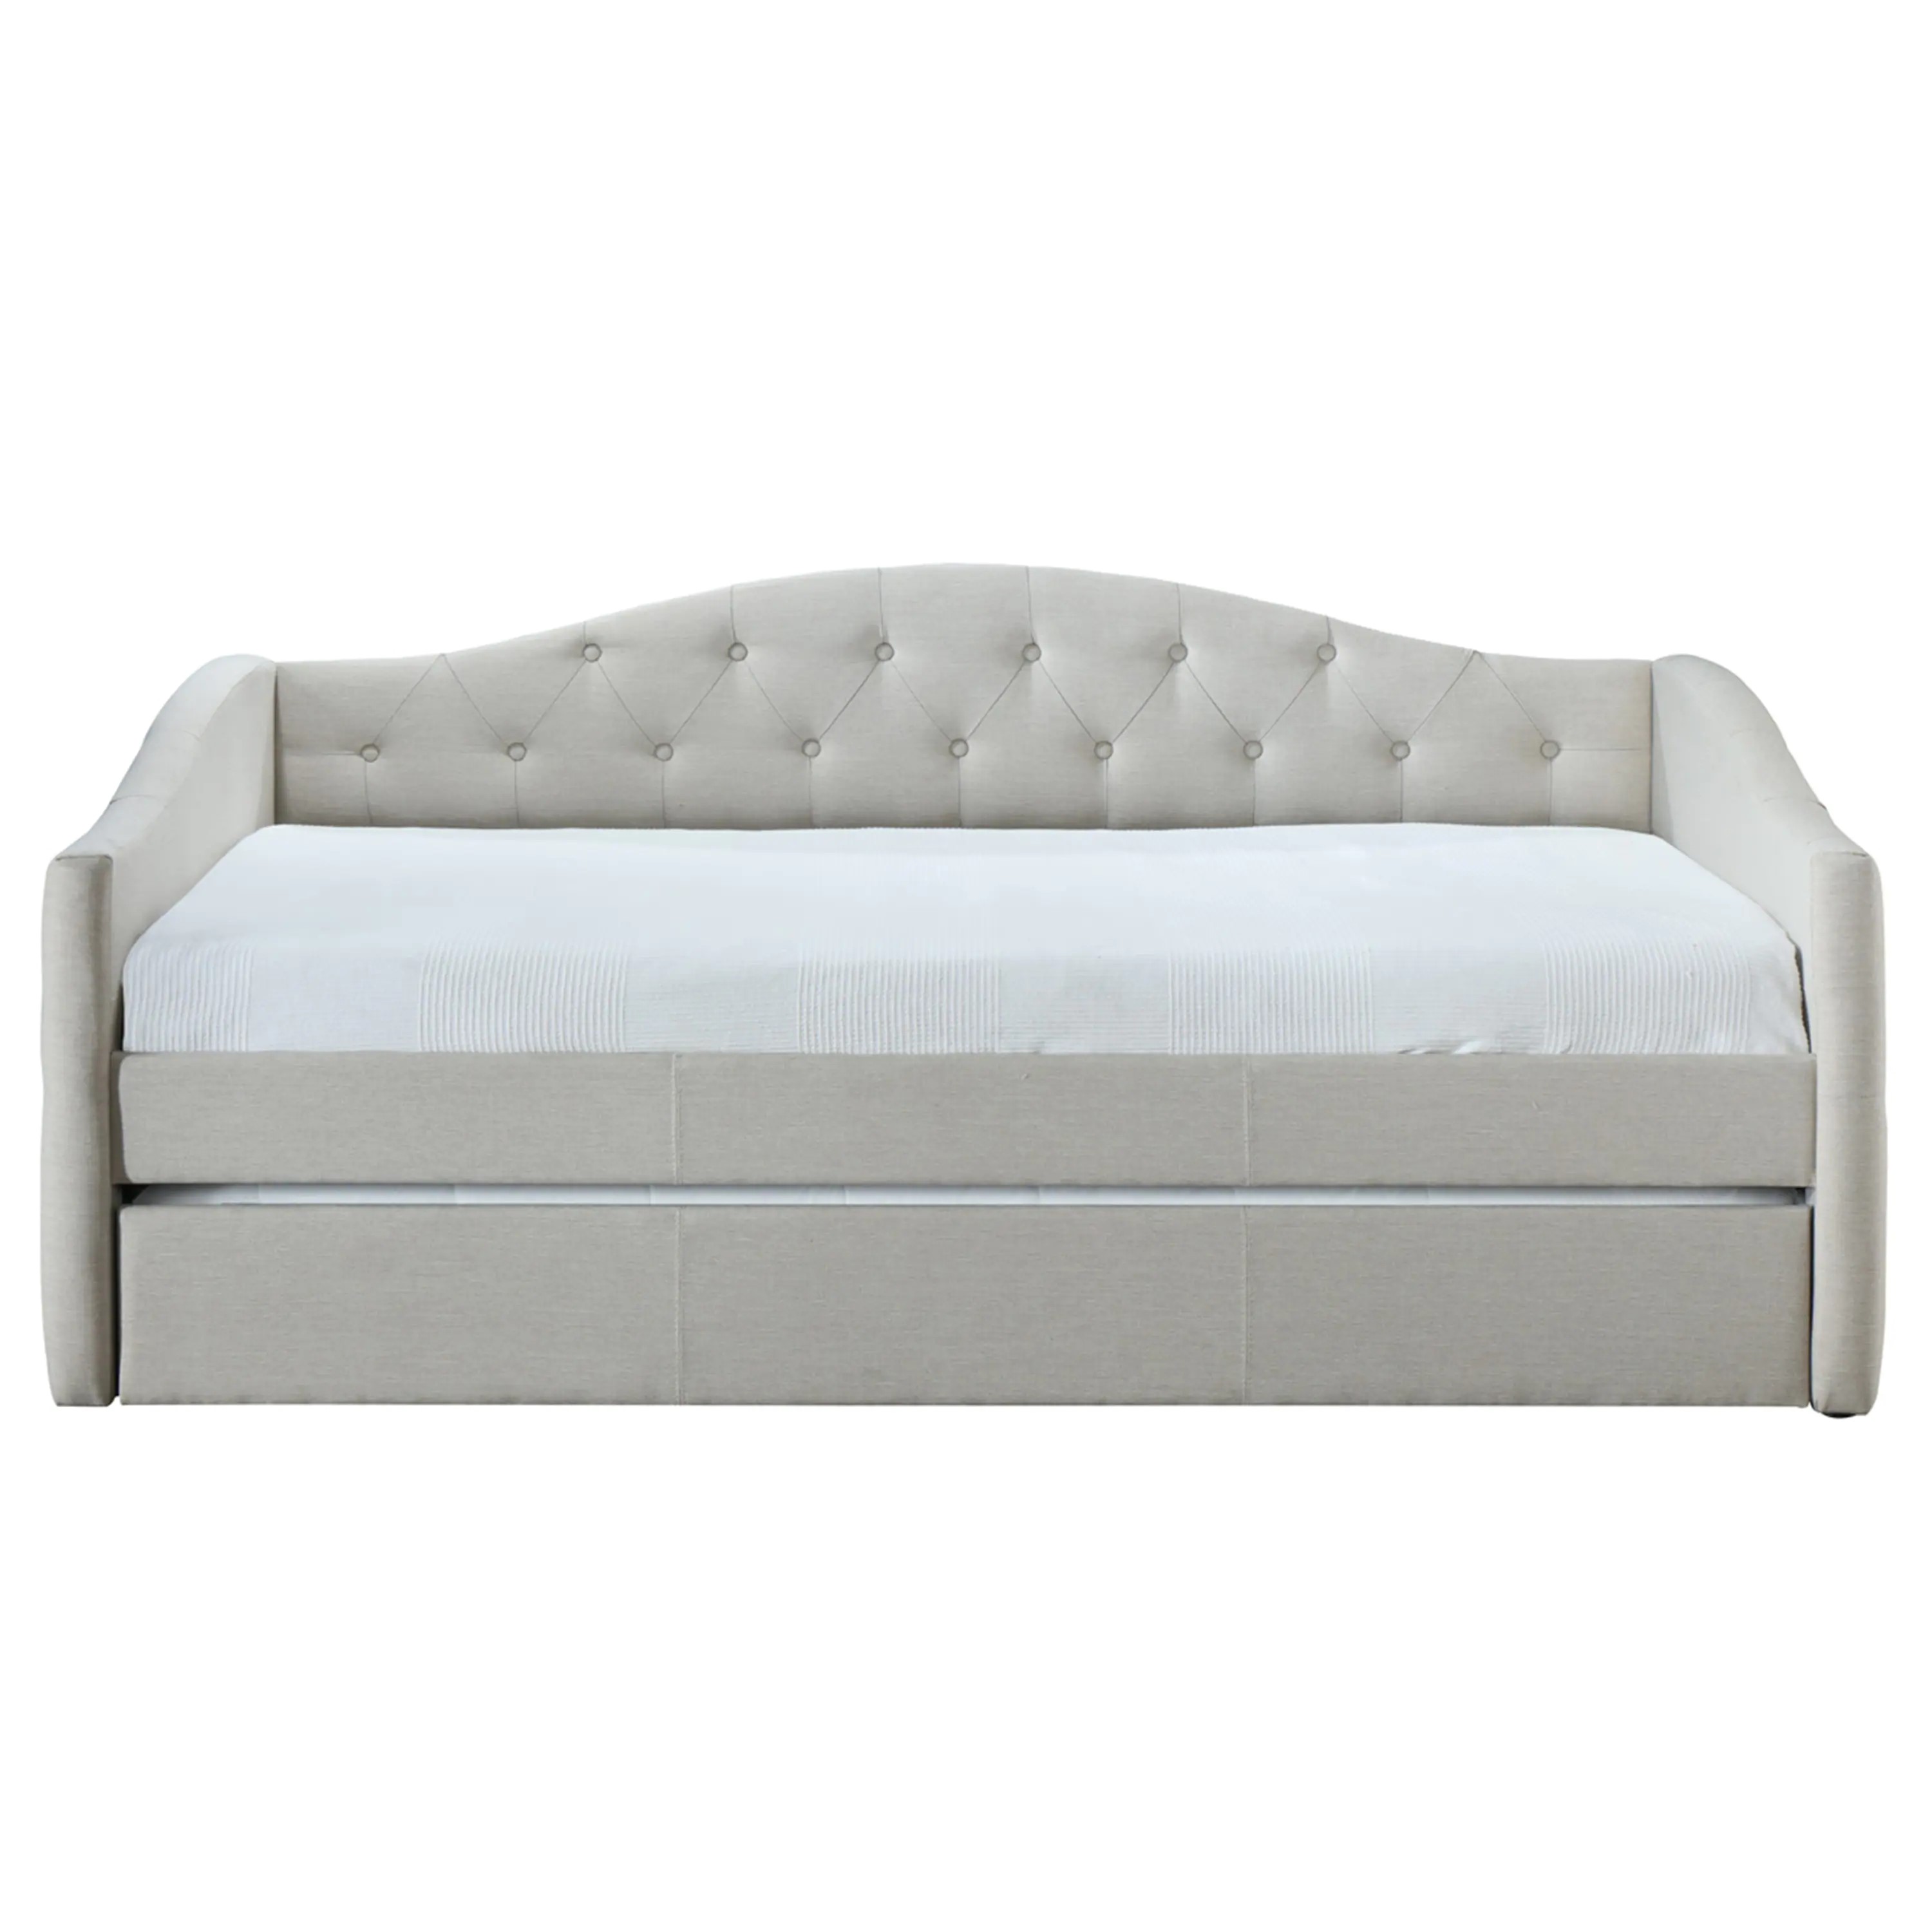 Sara&Cara Sofabed/Daybed with Trundle